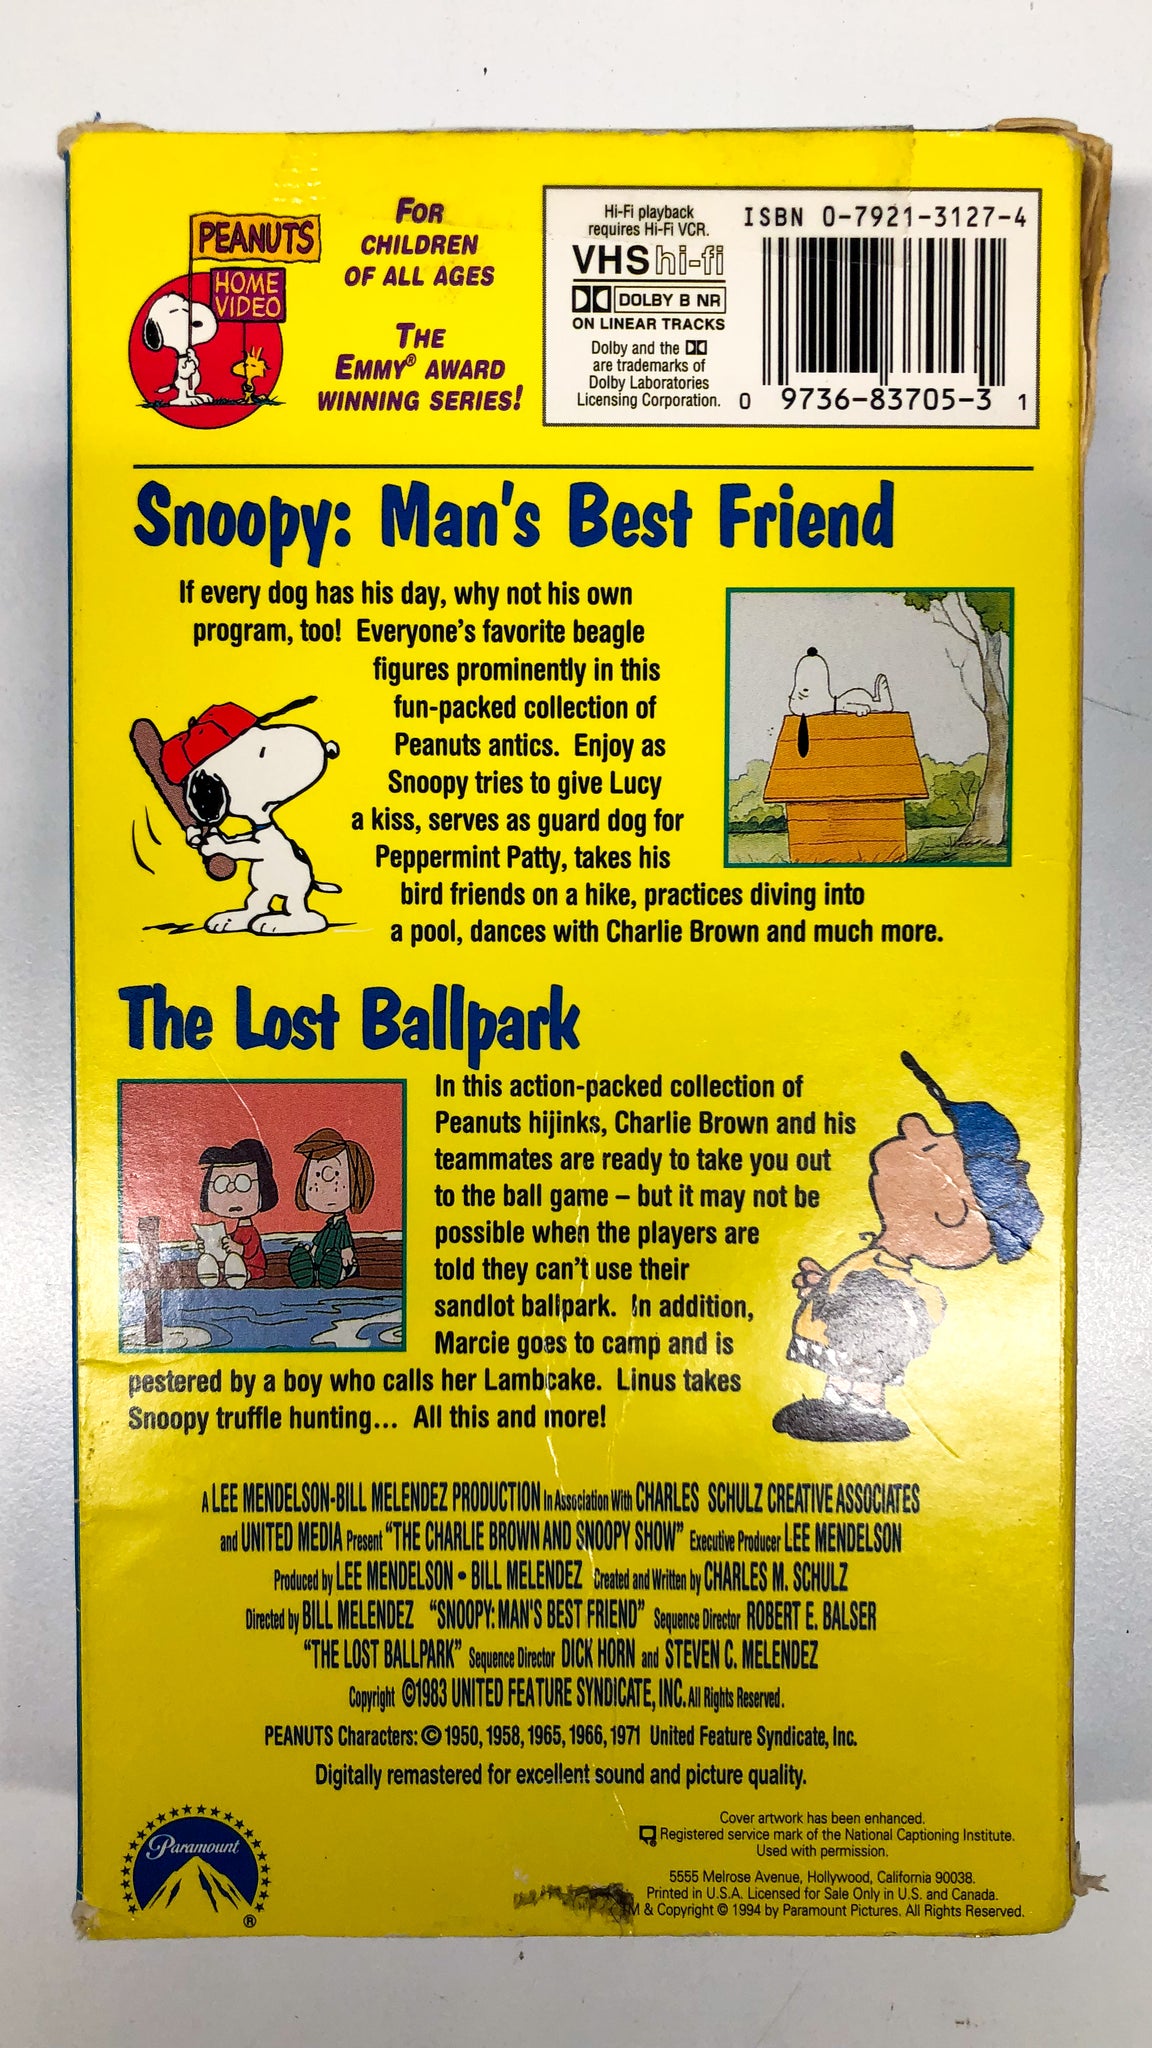 The Charlie Brown & Snoopy Show Volume Three